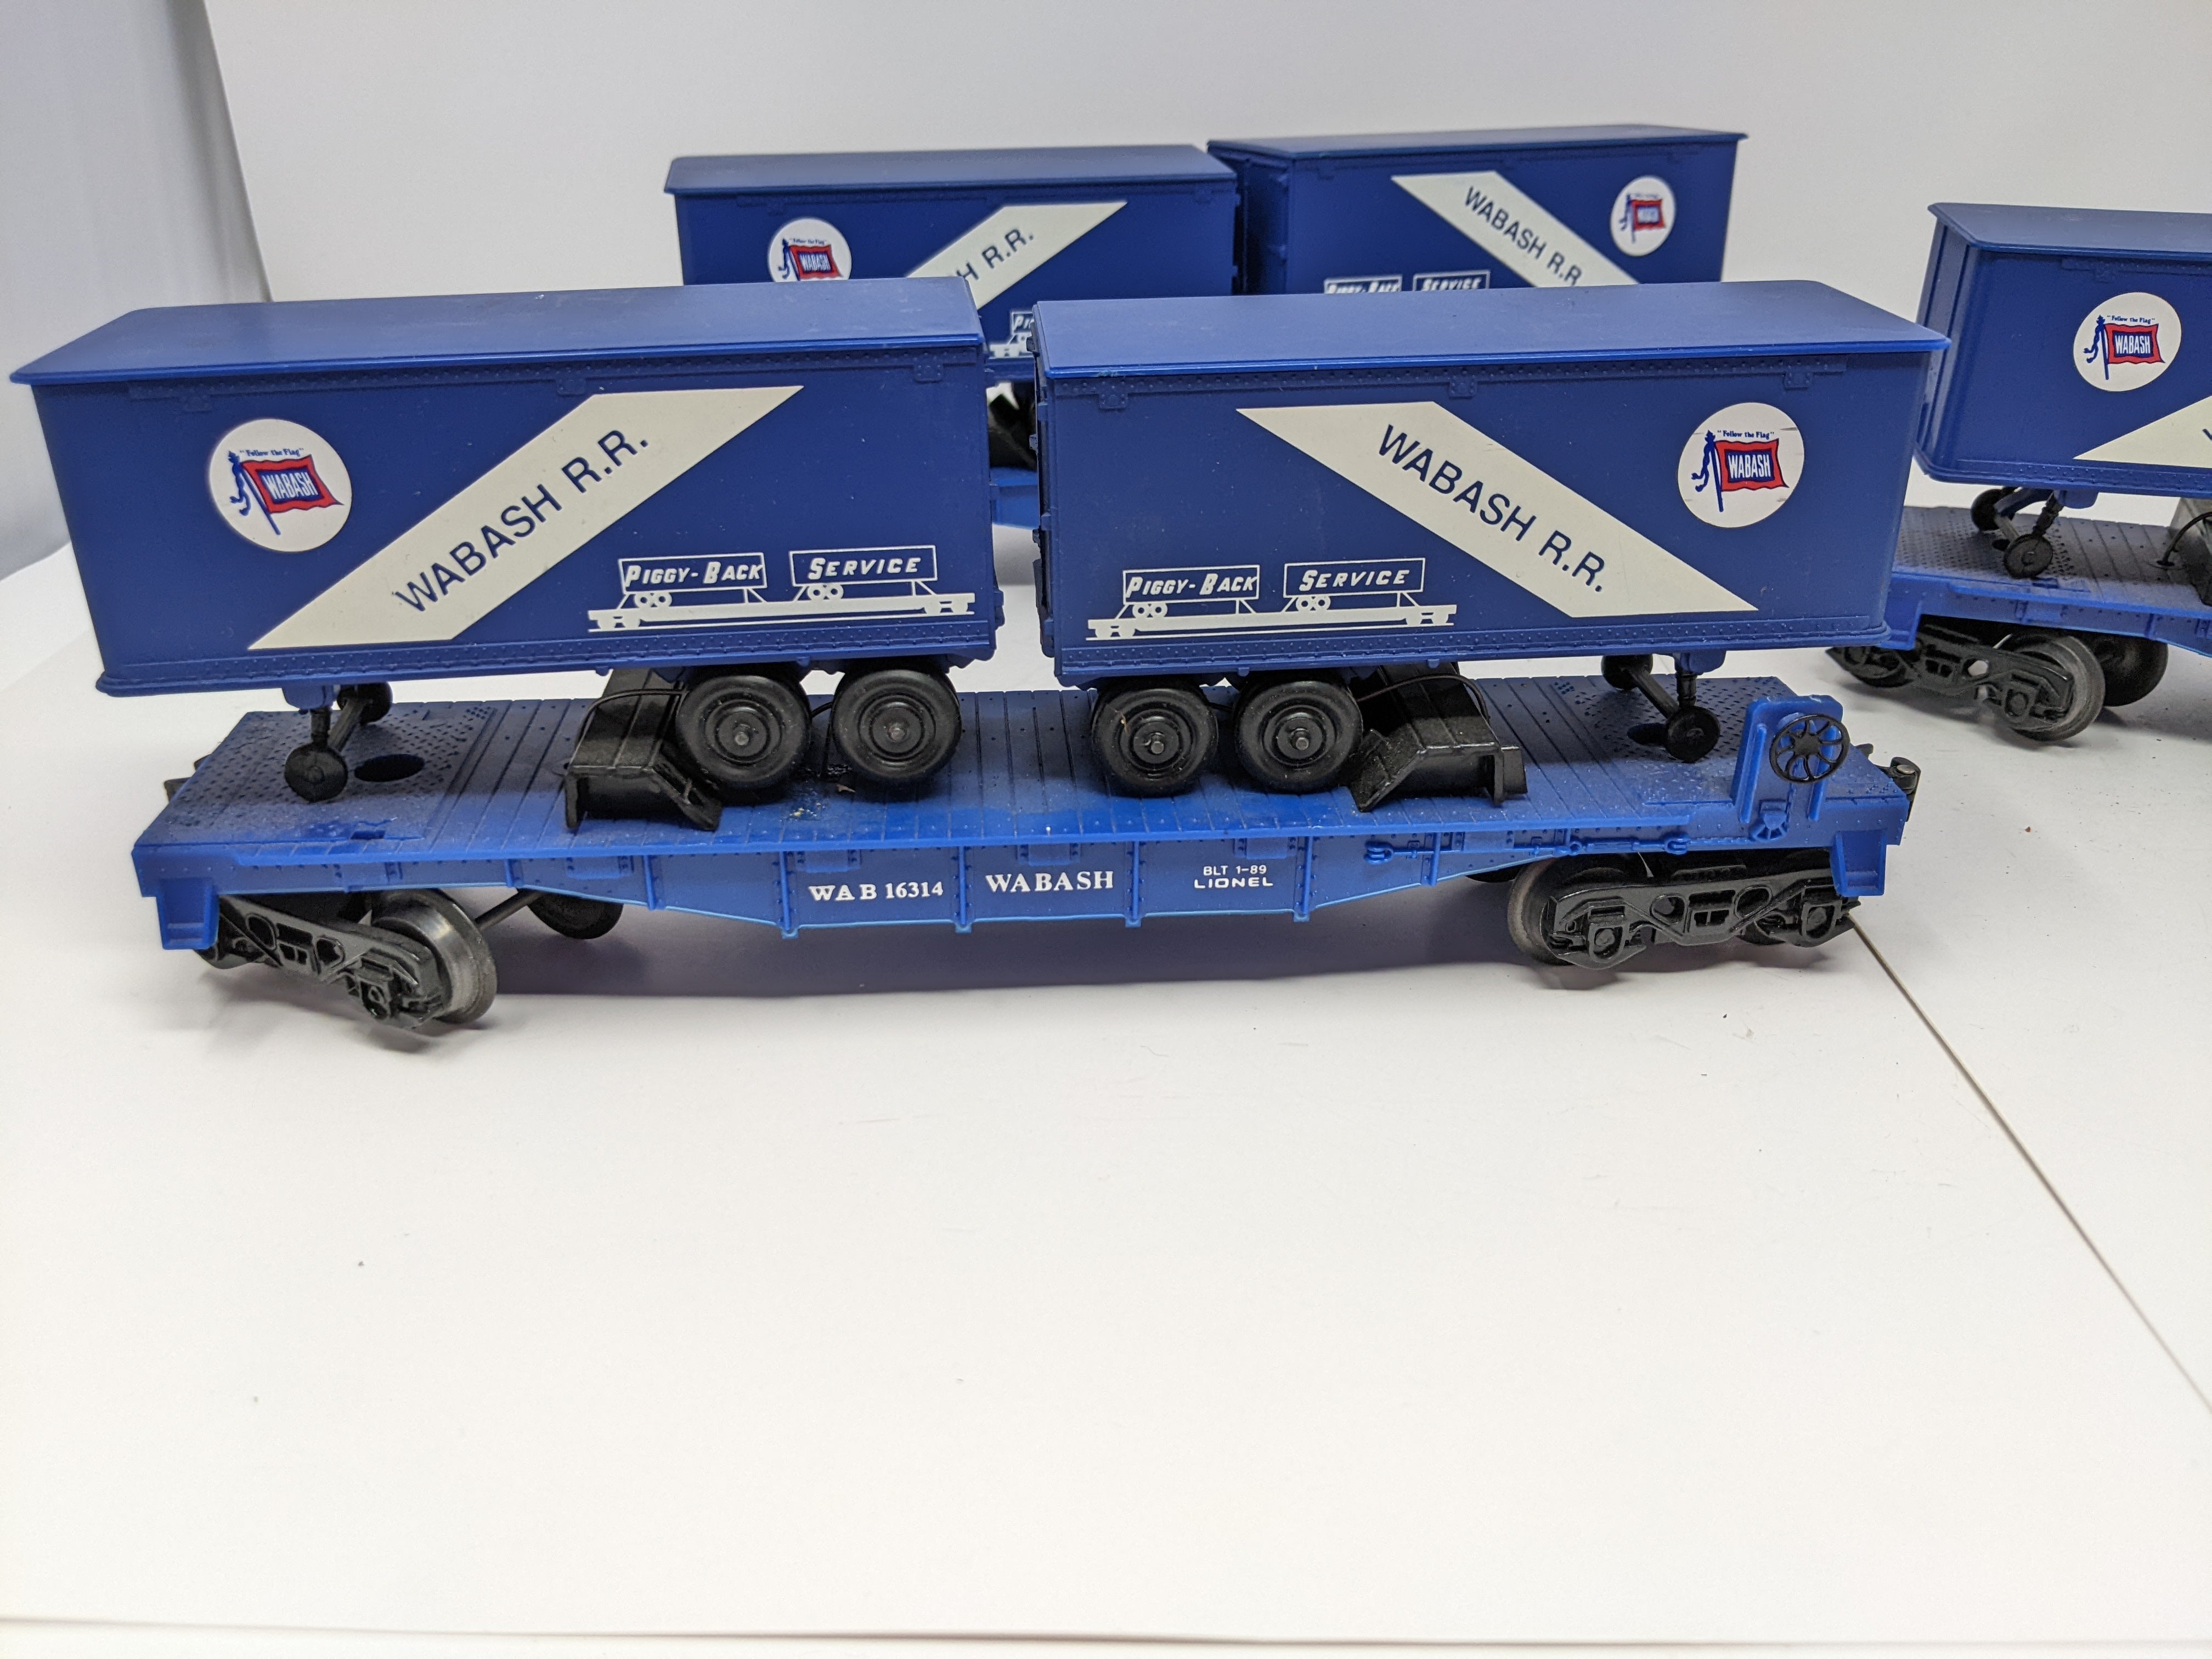 USED Lionel O, Lot of 3 - Flat Cars with Van Trailers Piggyback, Wabash WAB #16314